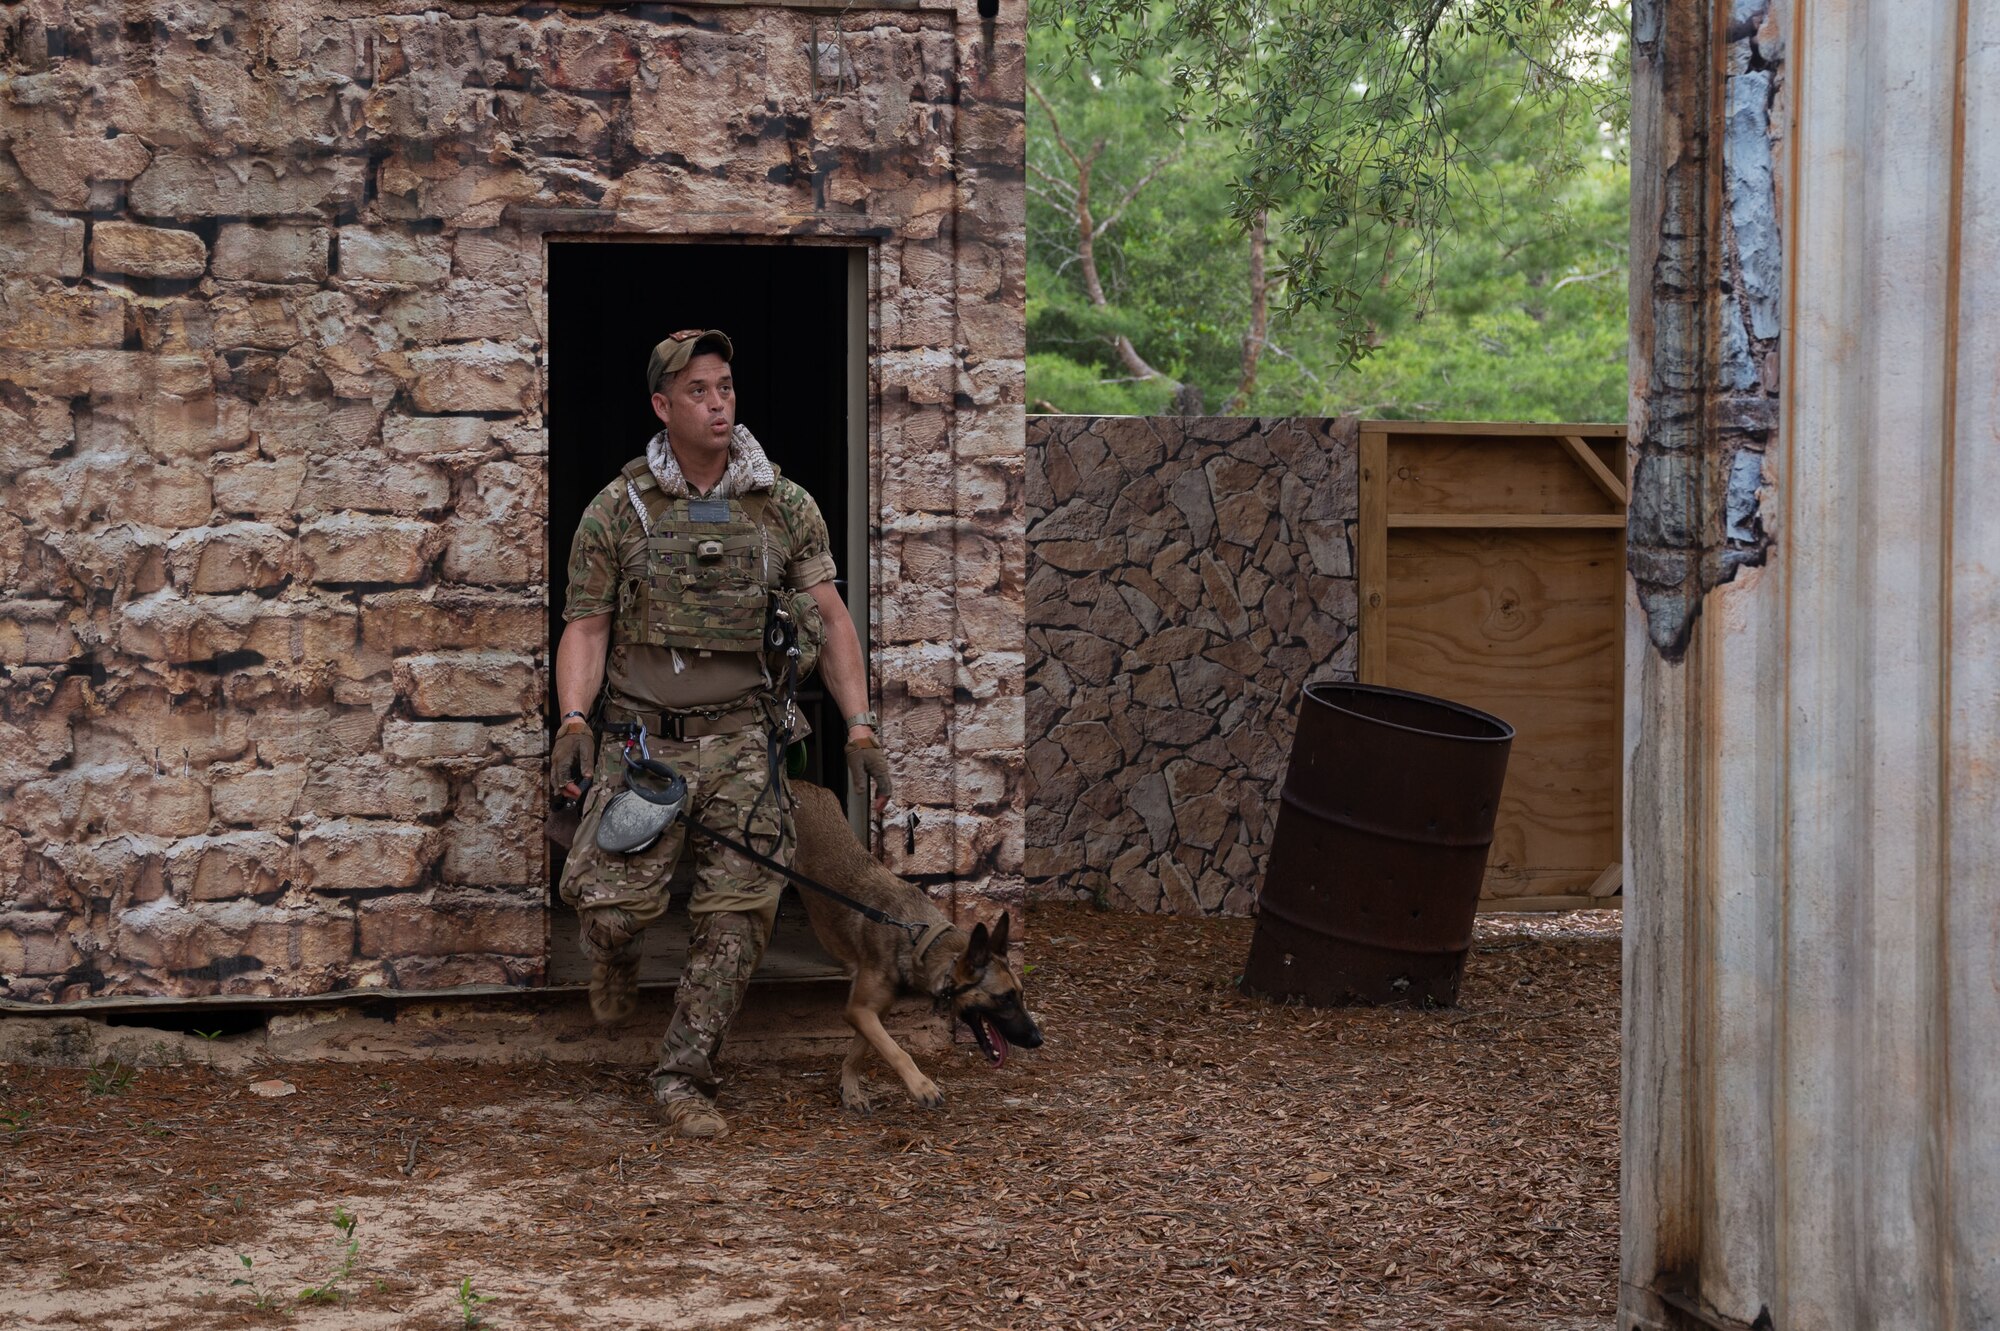 U.S. Air Force Master Sgt. Brandon Ouderkirk, a military working dog handler from Moody Air Force Base, competes in a K9 competition during National Police Week on May 18, 2022, at Eglin Air Force Base